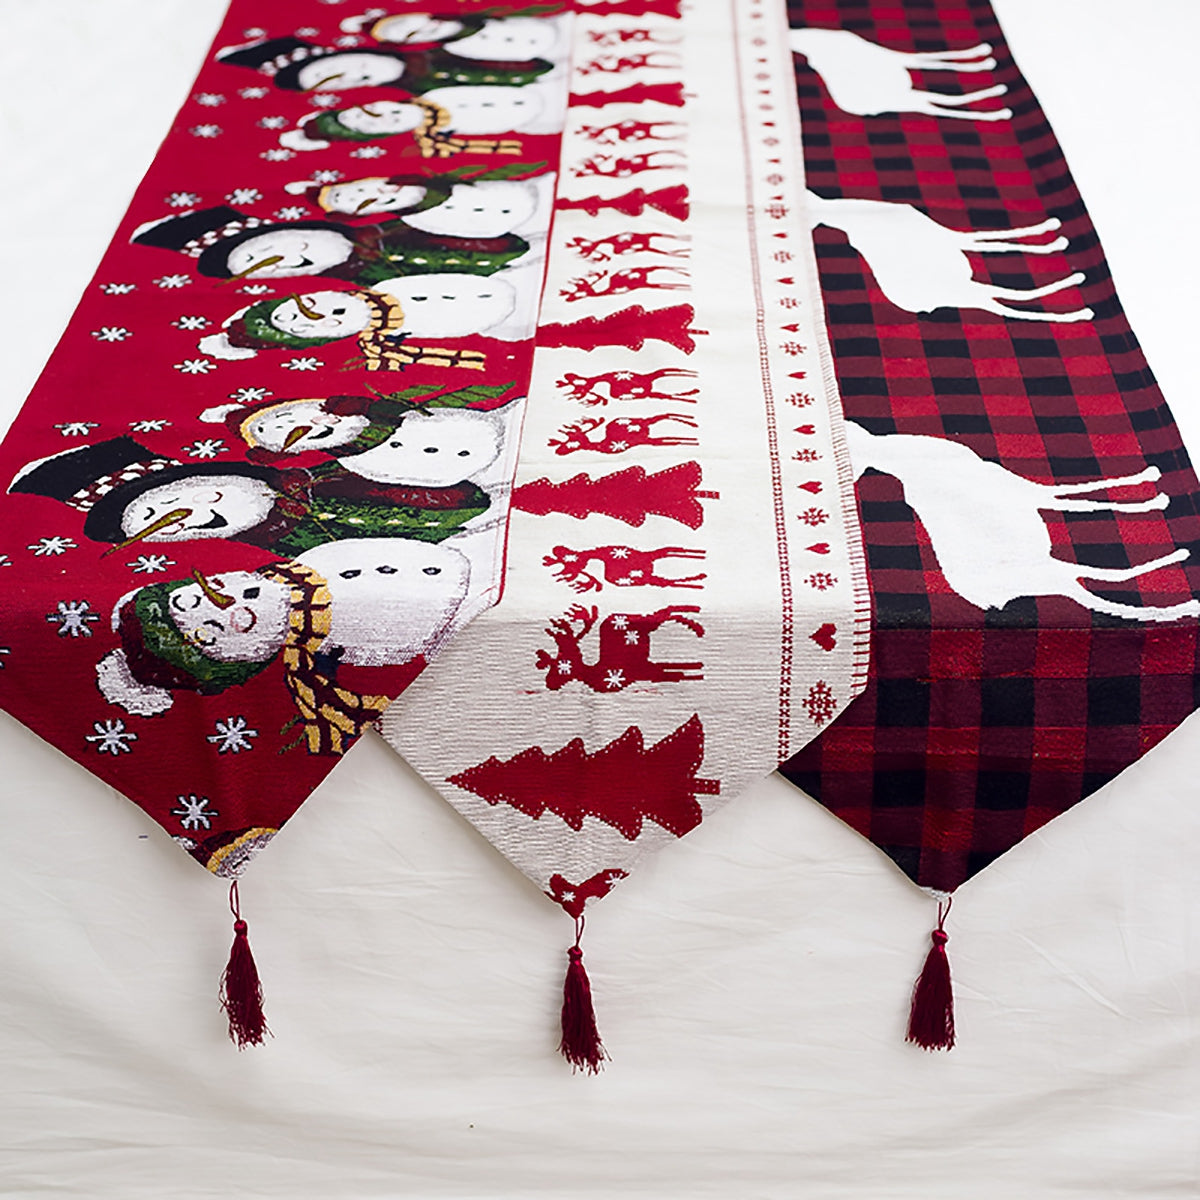  "Elevate your table with festive charm. Shop Christmas table runners for holiday dining perfection!" image 1